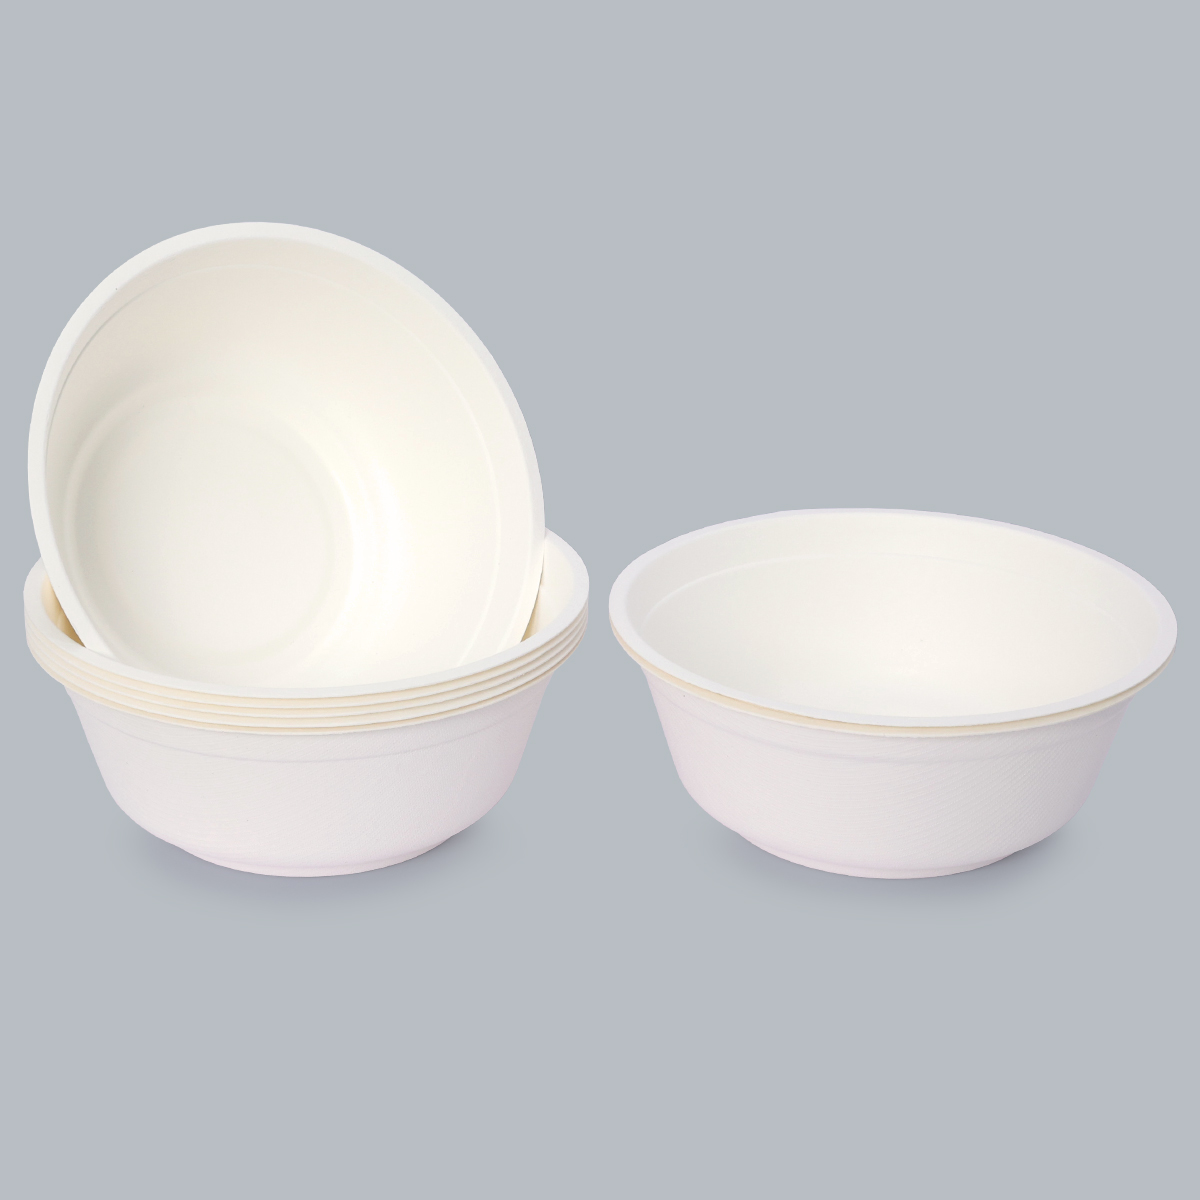 Heat-resistant bowls Eco-friendly bowls Disposable environmentally friendly tableware